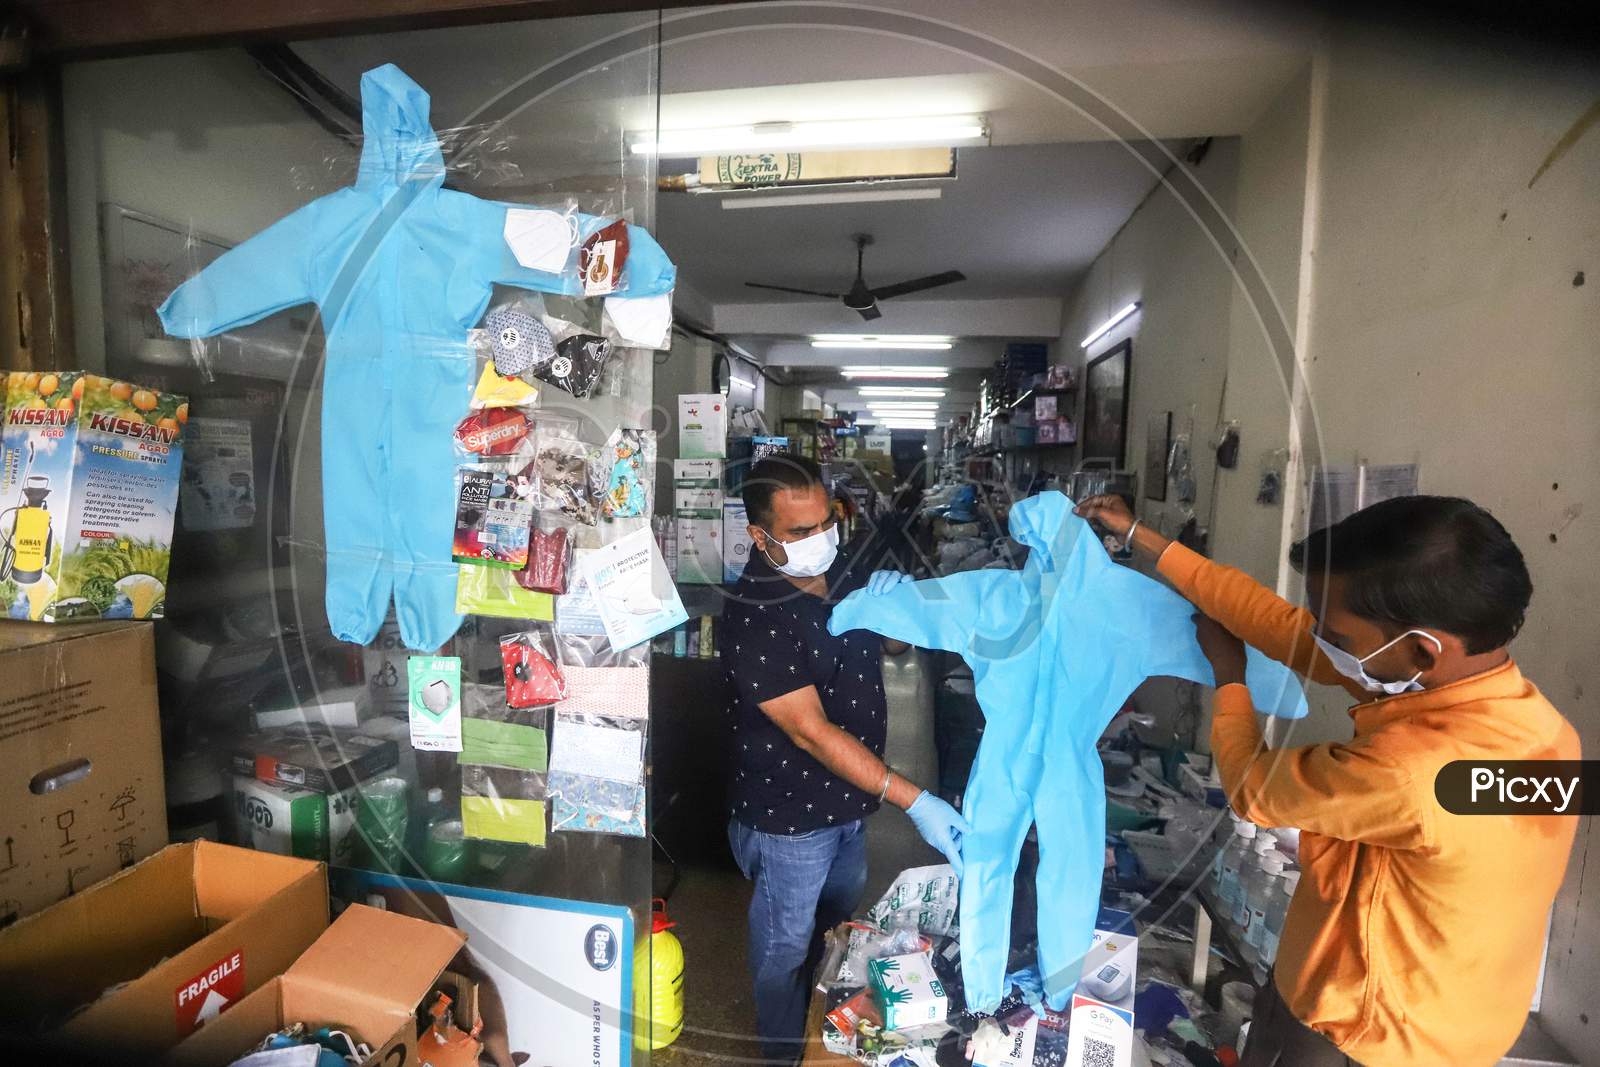 Parents were seen buying PPE kits for their children from a store in New Delhi, India on June 20, 2020.